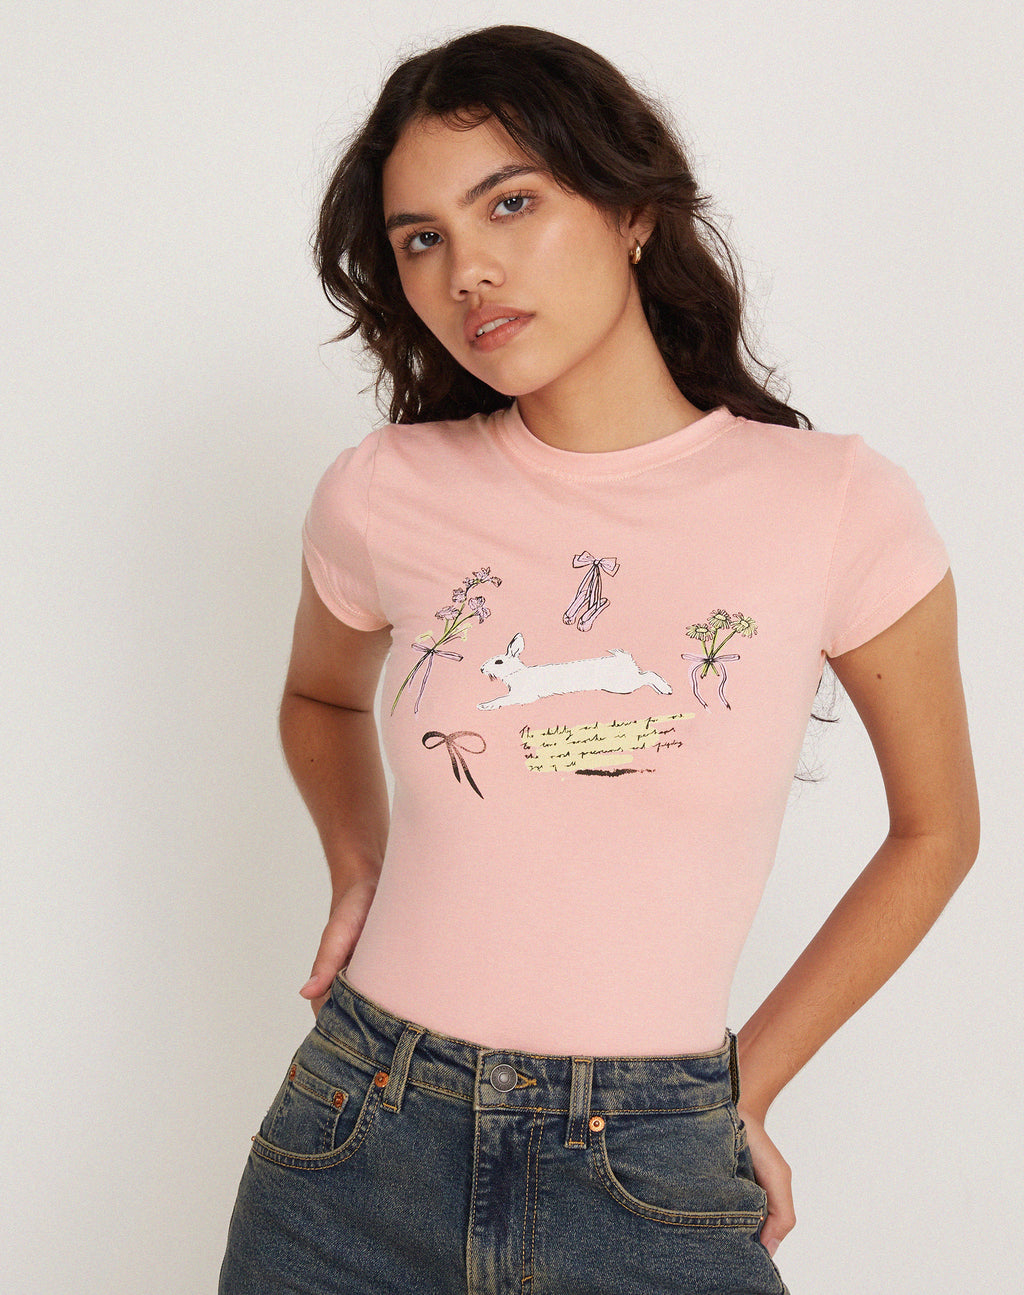 Tiona Cropped Tee in Peony Pink Bunny